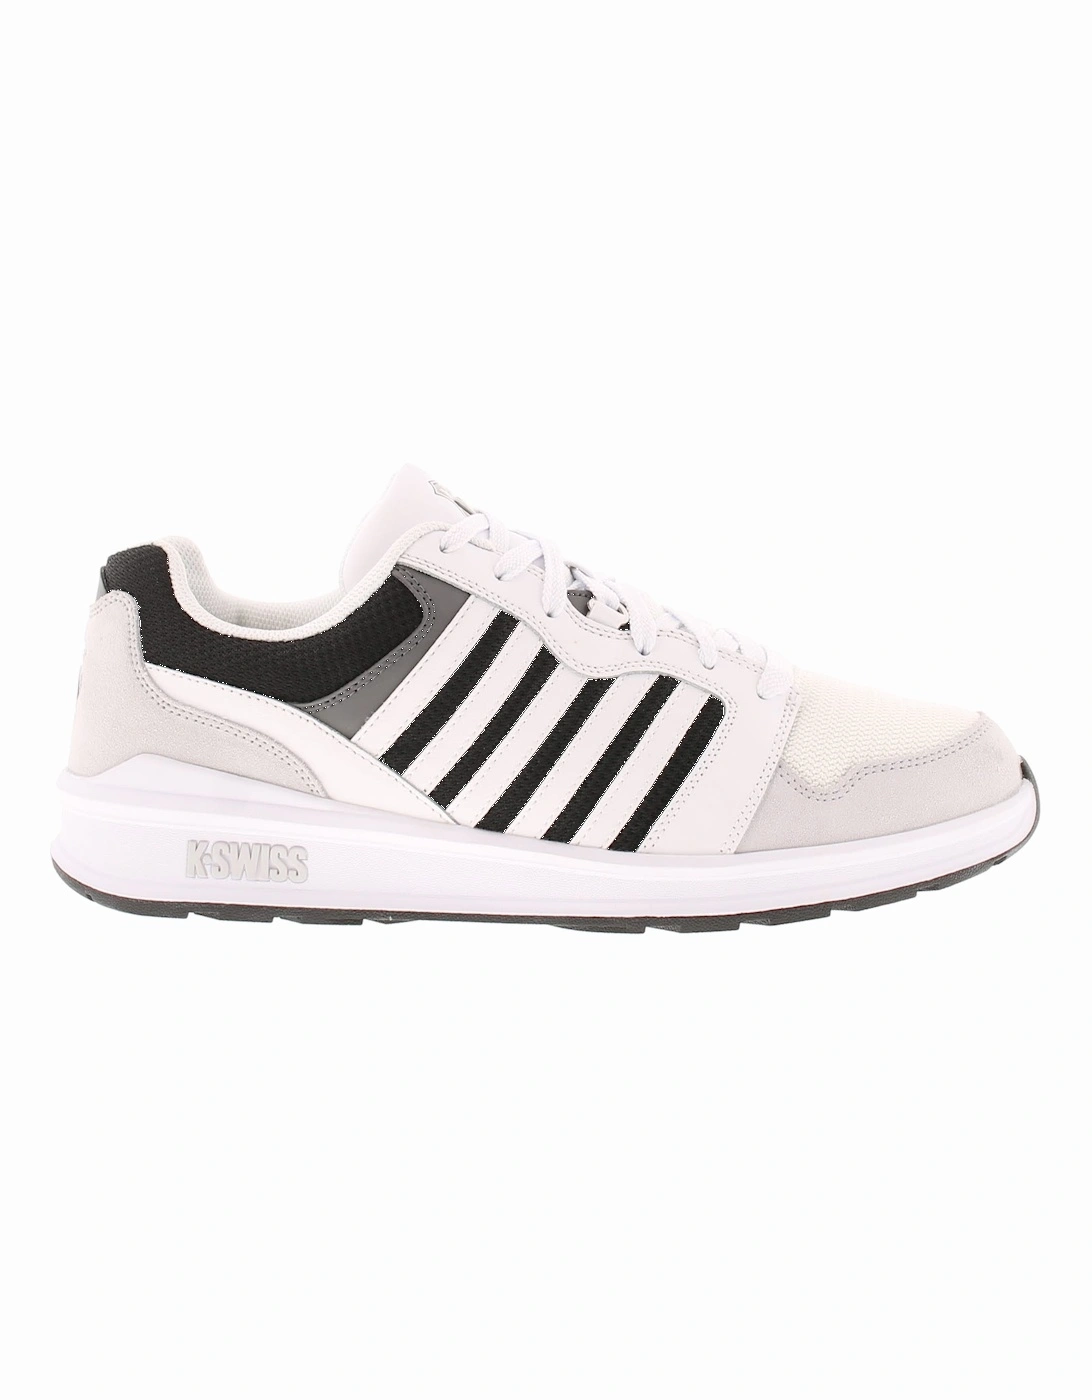 K-Swiss Mens Trainers Rival Leather Lace Up white UK Size